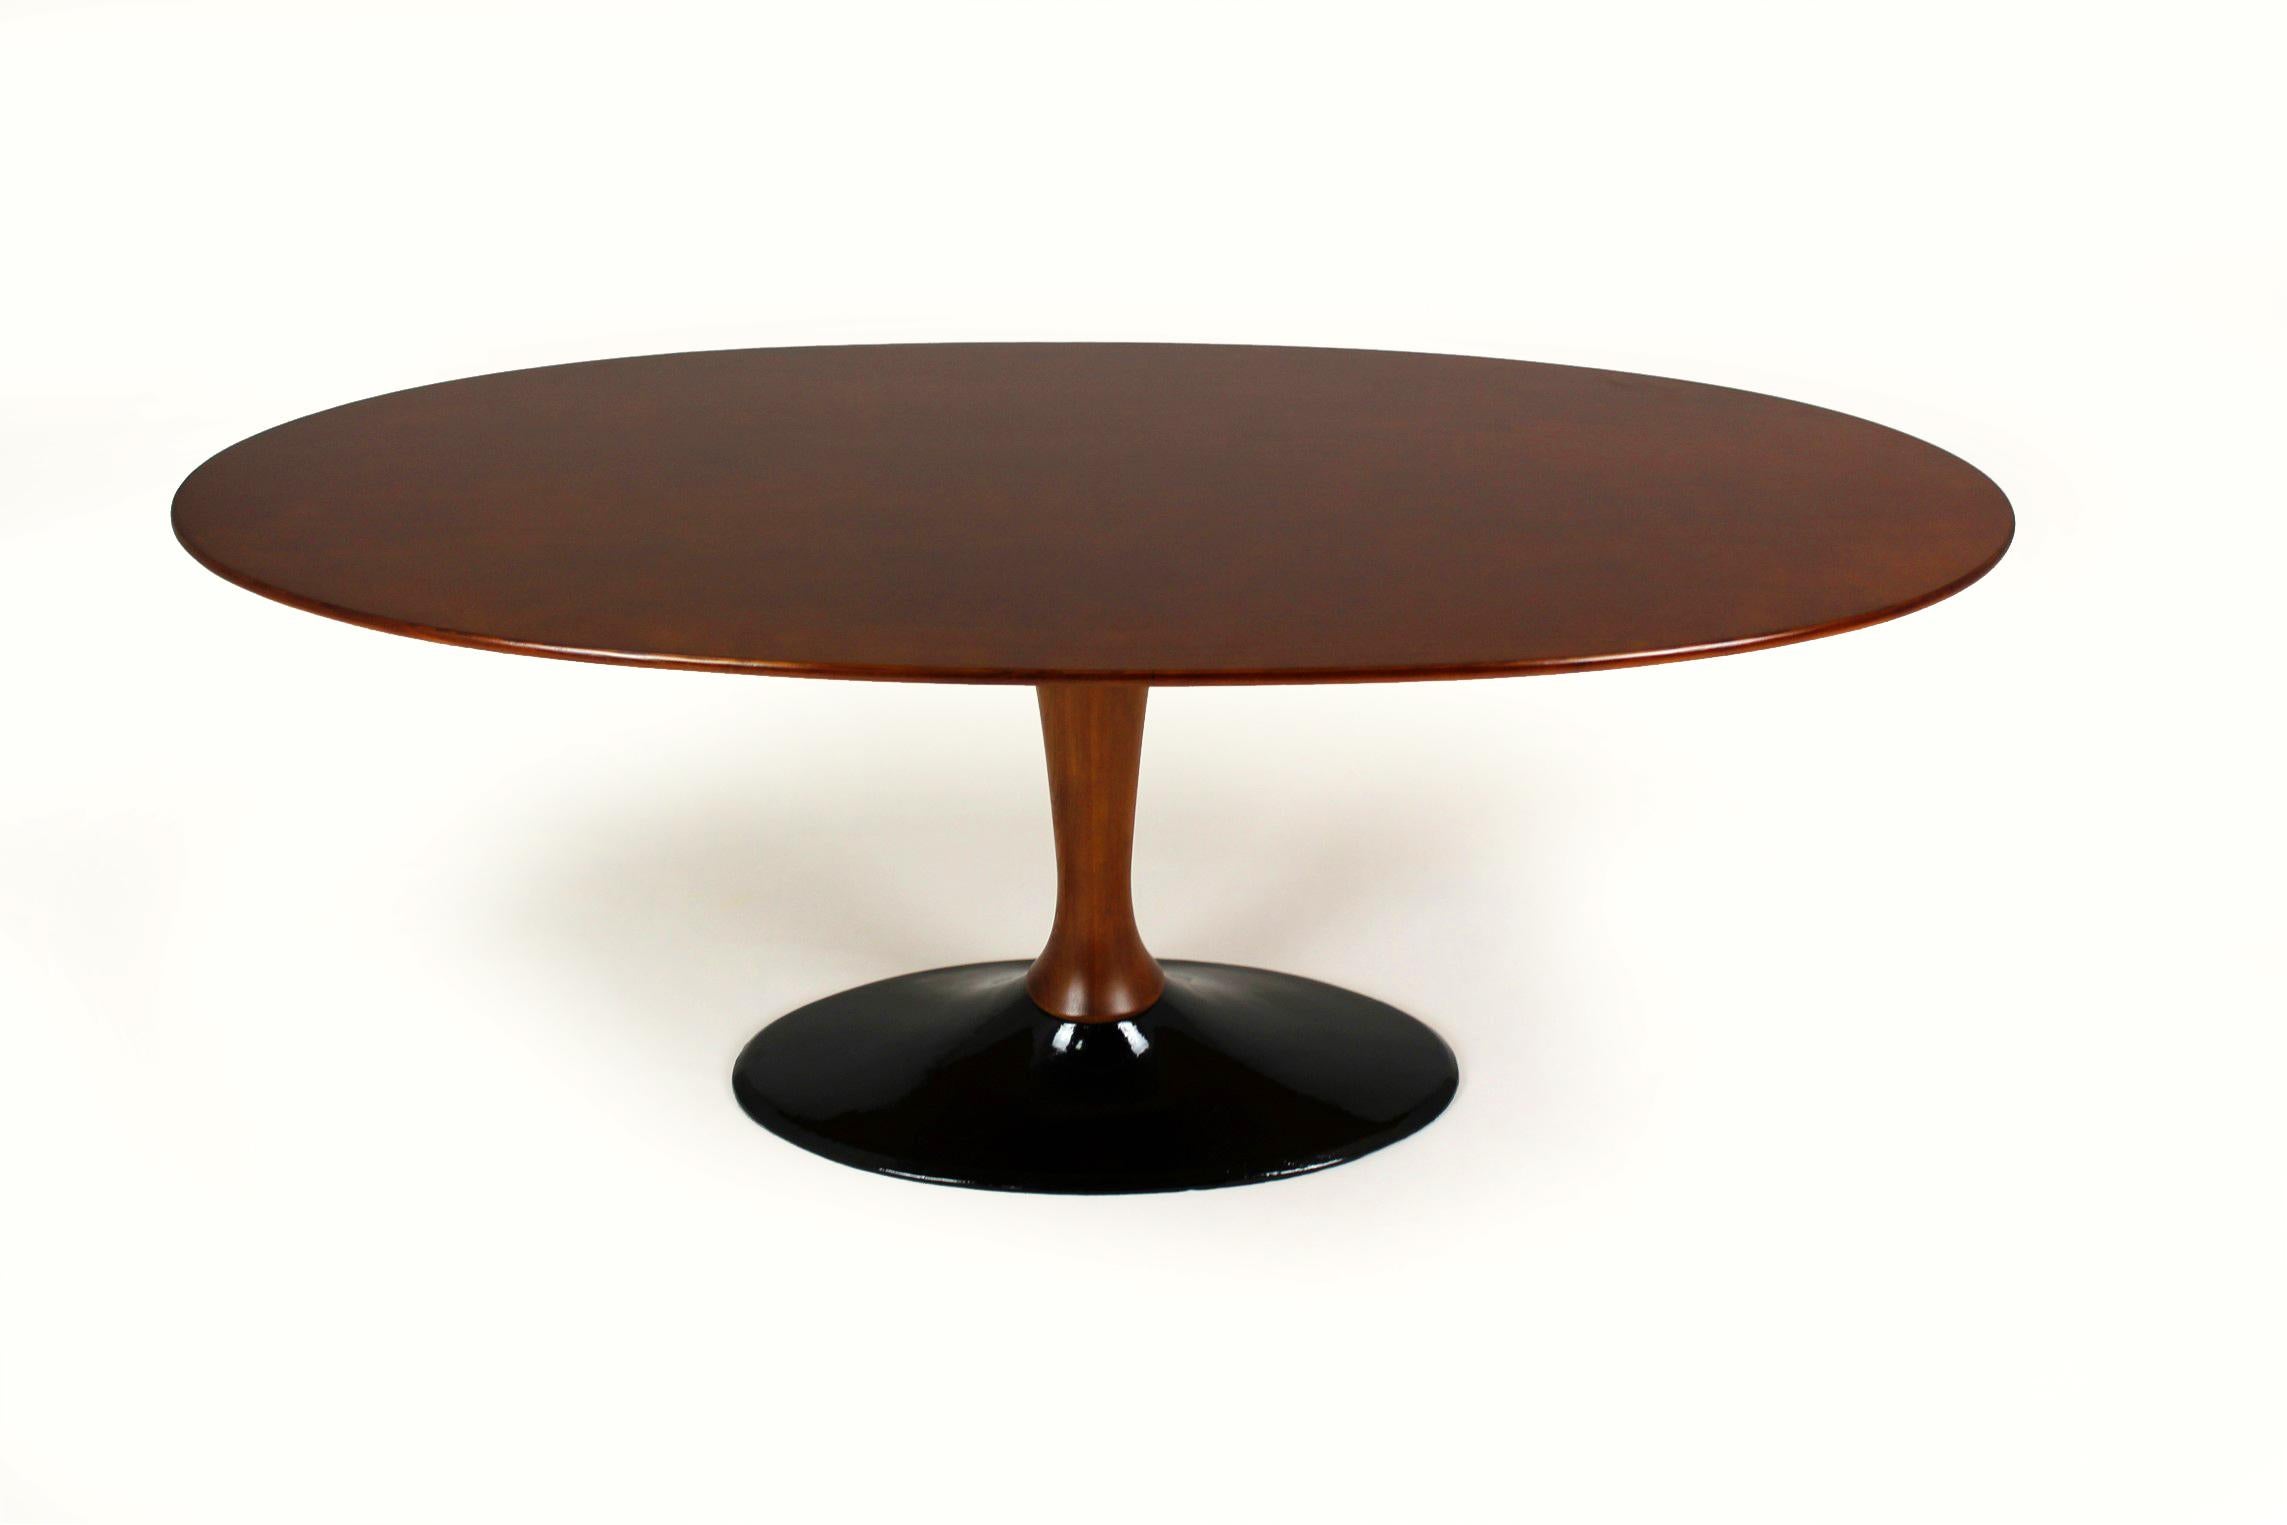 
This ash coffee table was manufactured by Drevotvar in the Czech Republic in the 1960s/1970s. The table top is supported on a turned leg, attached to a heavy steel base. The table has been renovated, lacquered with a satin finish.